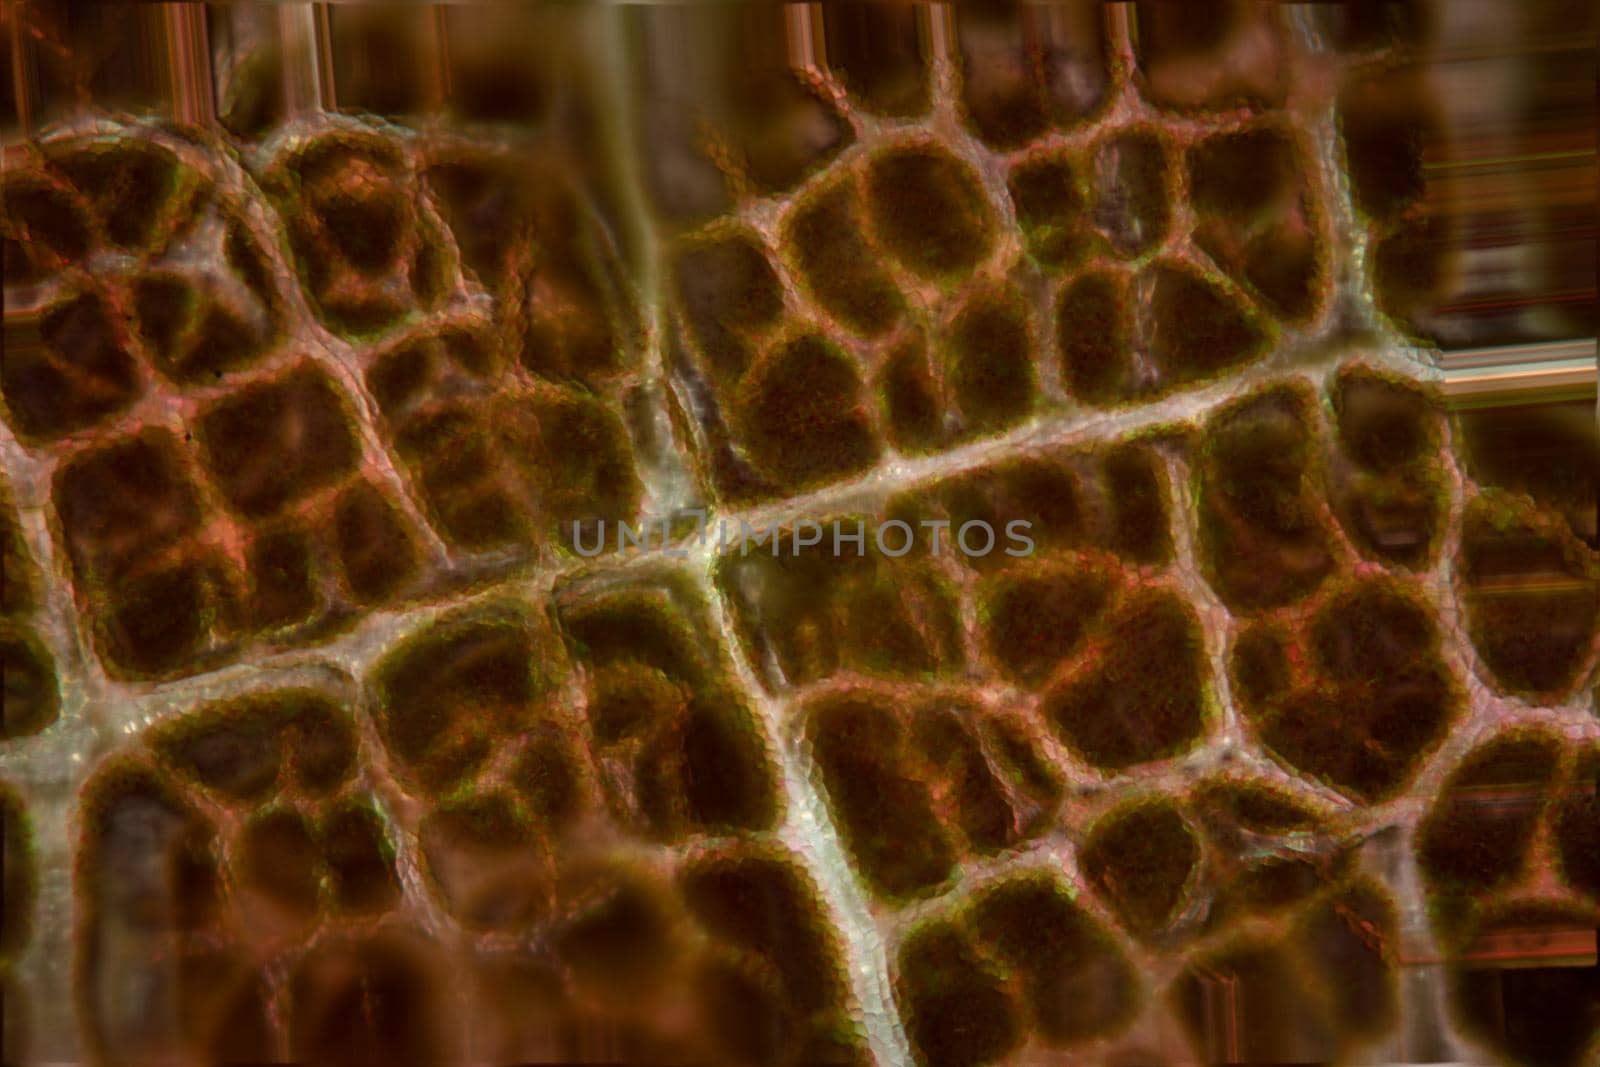 Leaf of a deciduous tree with leaf veins under a microscope 100x